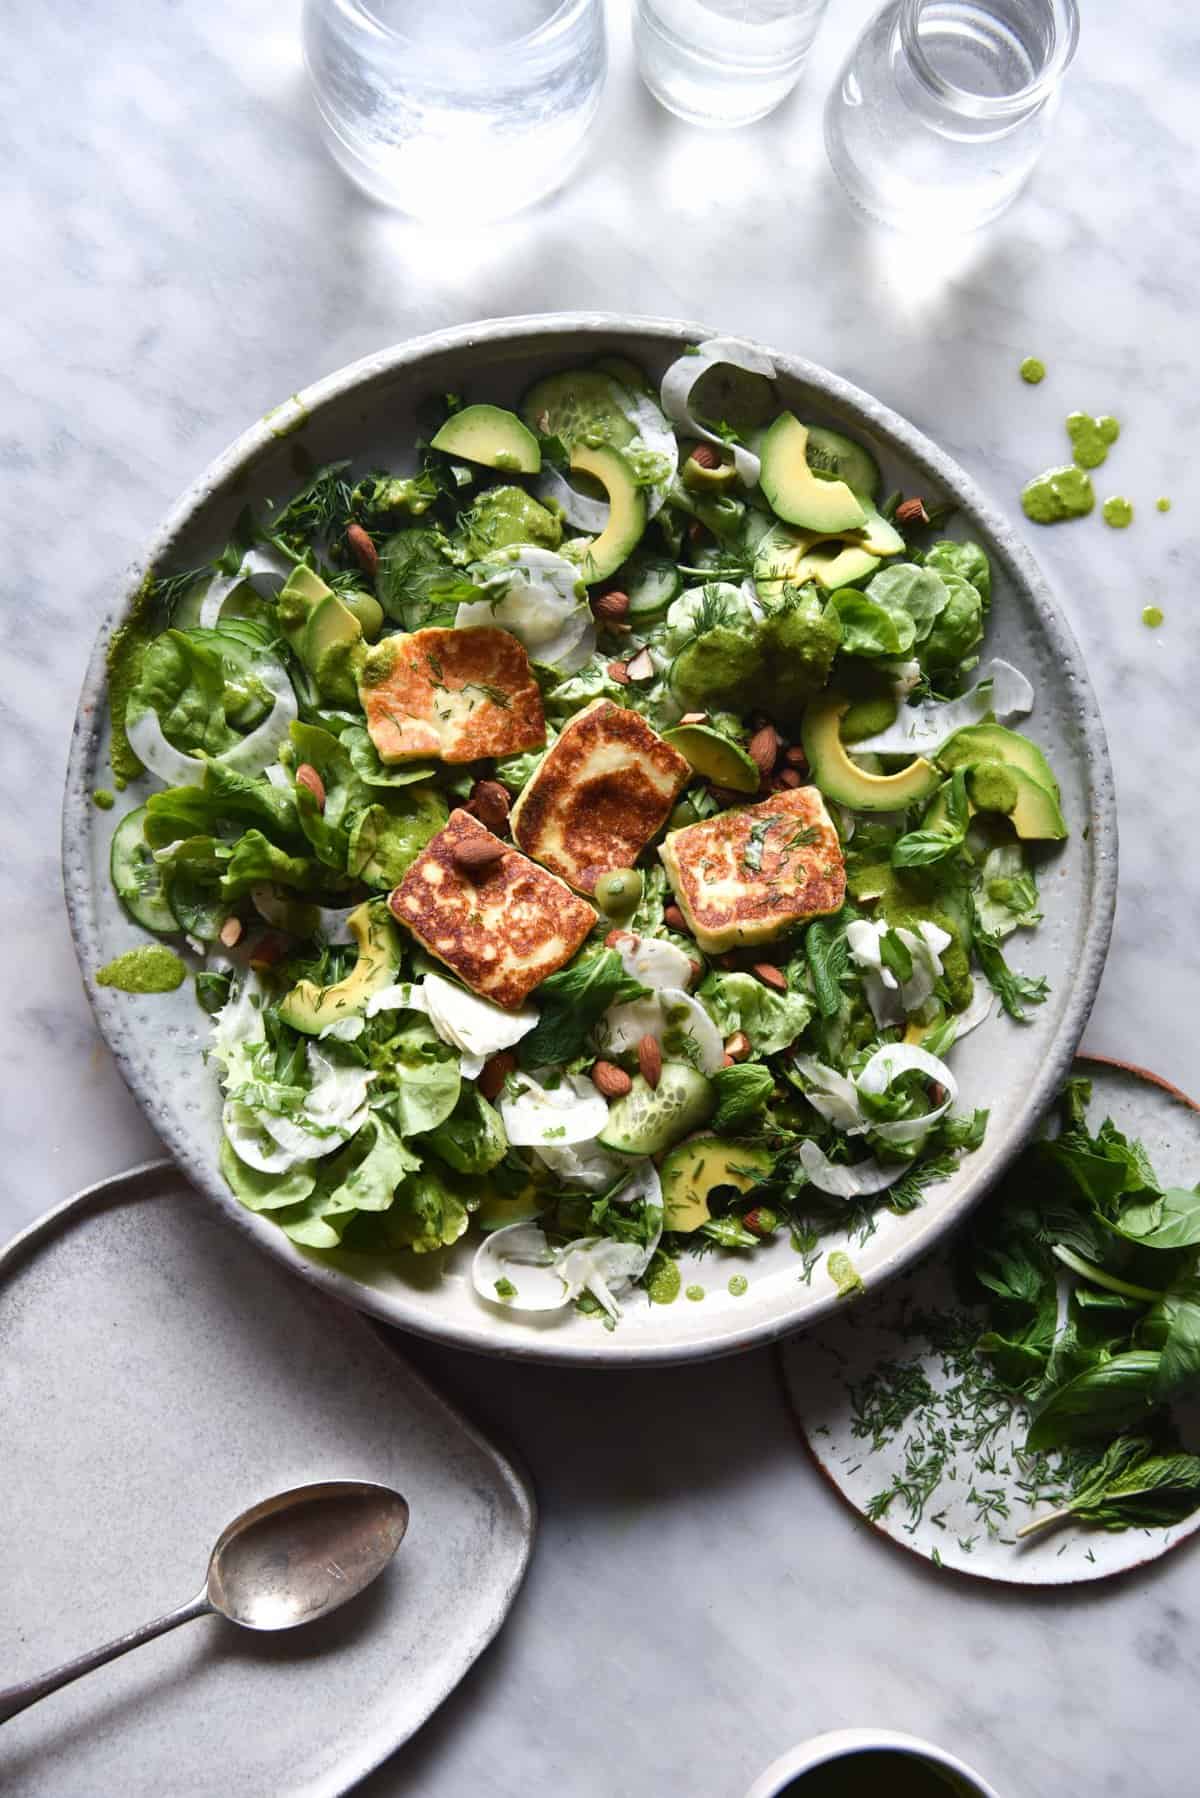 An aerial sunlit view of a green salad topped with haloumi. The salad sits on a white plate against a white marble table